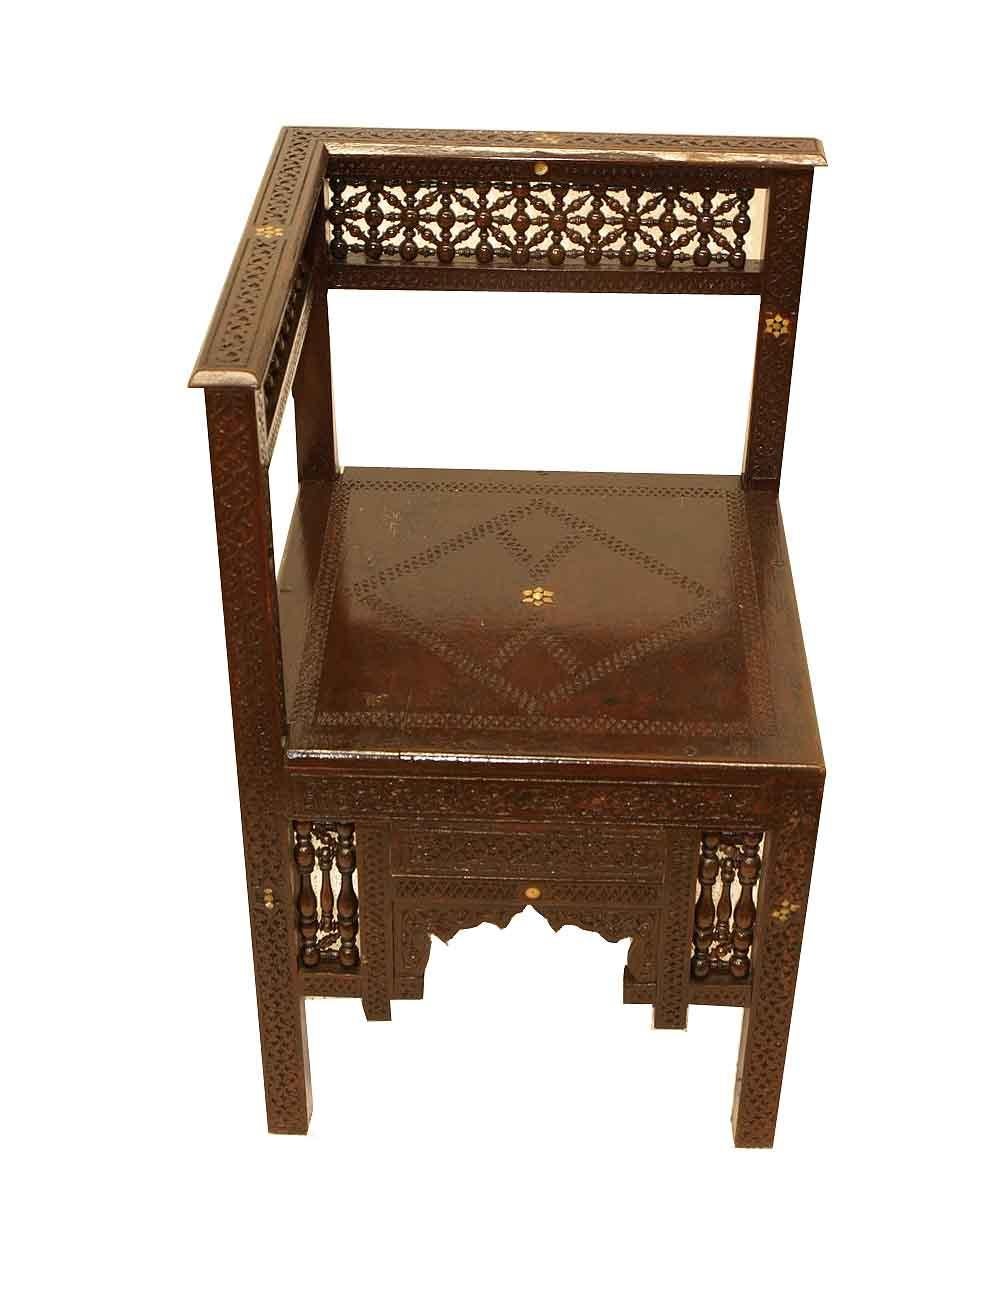 Carved Moroccan corner chair, the carved crest rail with inlaid mother of pearl stylized stars above the back with a multitude of interconnected turned small spindles. All four sides of this chair and seat are similarly carved and with mother of